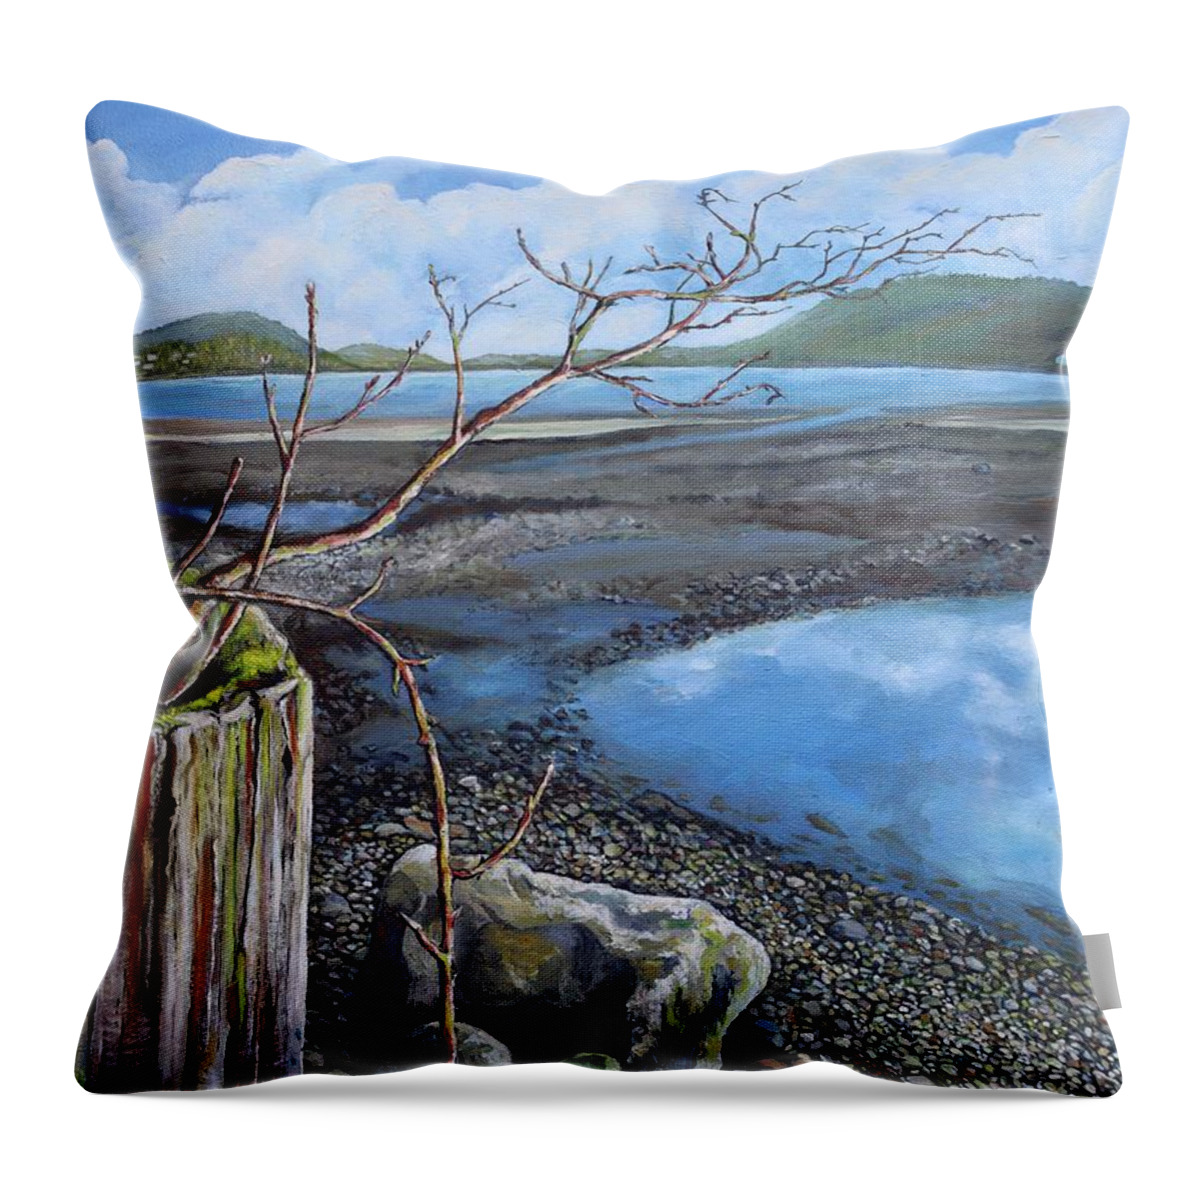 Water Throw Pillow featuring the painting Tidal Zone Summer by Margot Brassil